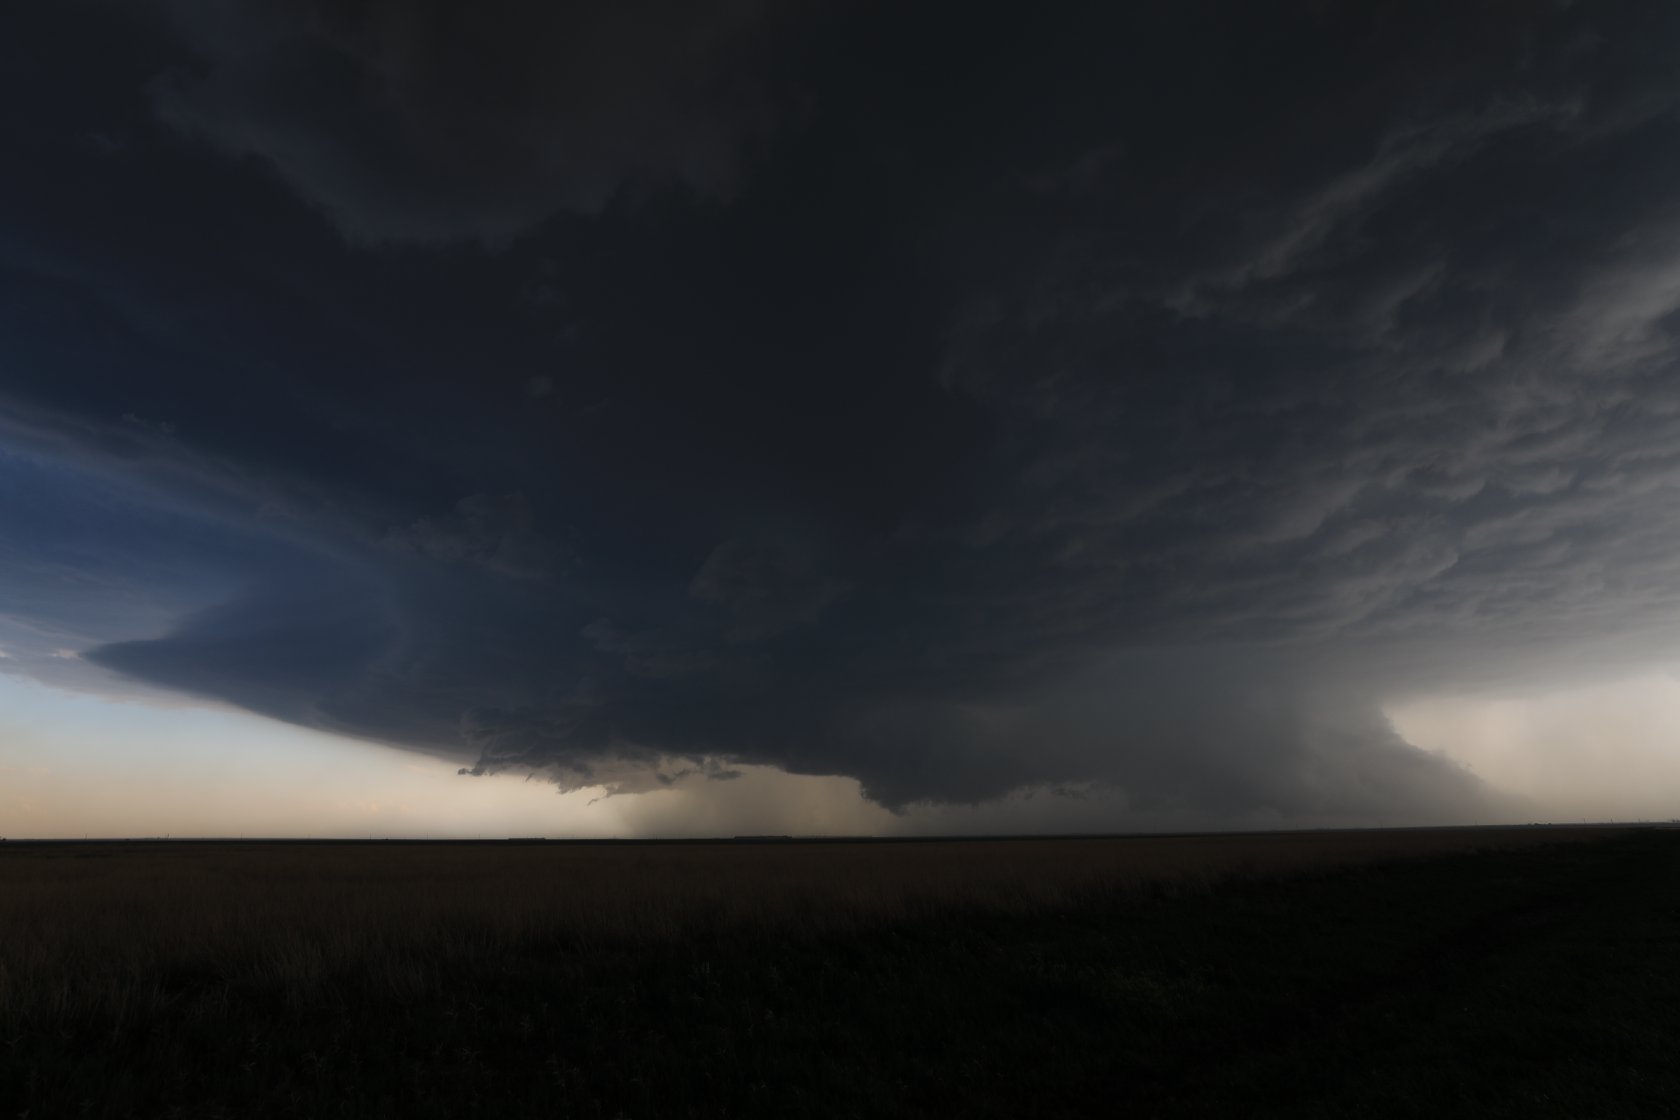 Massive chase on this day including busting a window with base ball sized hail at night with powerful winds

Just a few pics tonight - I made it ahead...